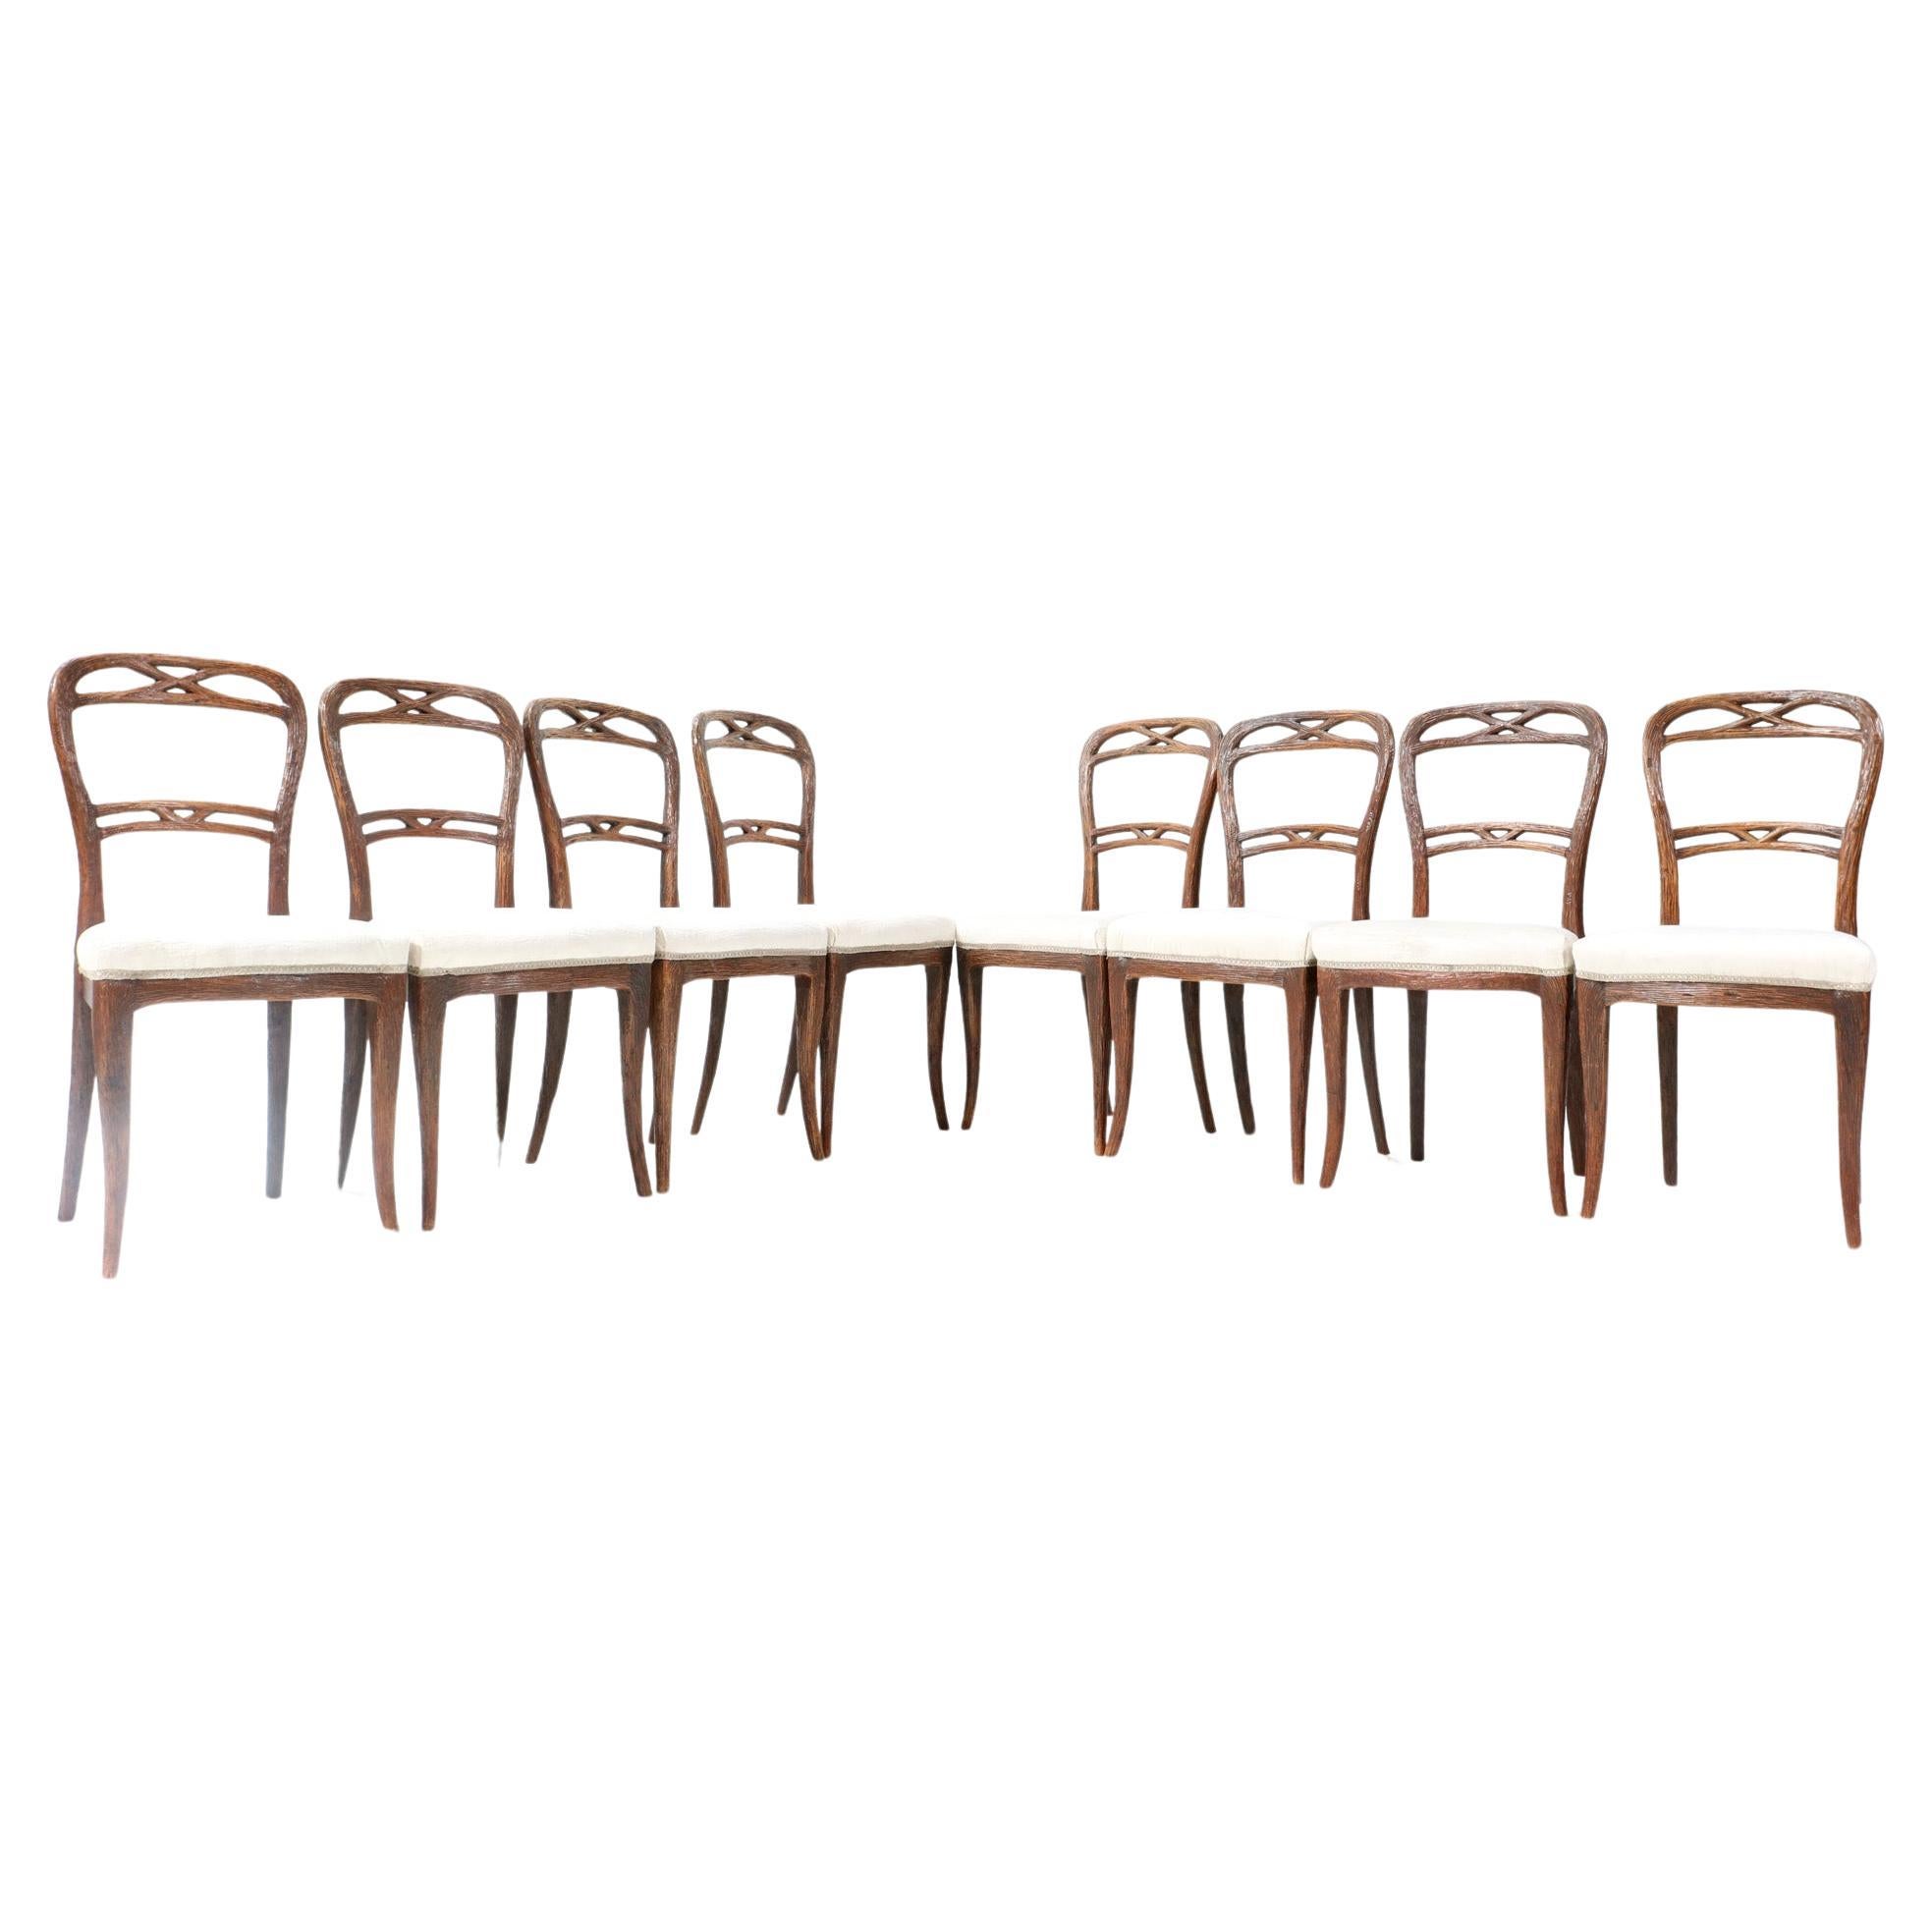  Black Forest Walnut Dining  Chairs by Matthijs Horrix for Horrix, 1880s